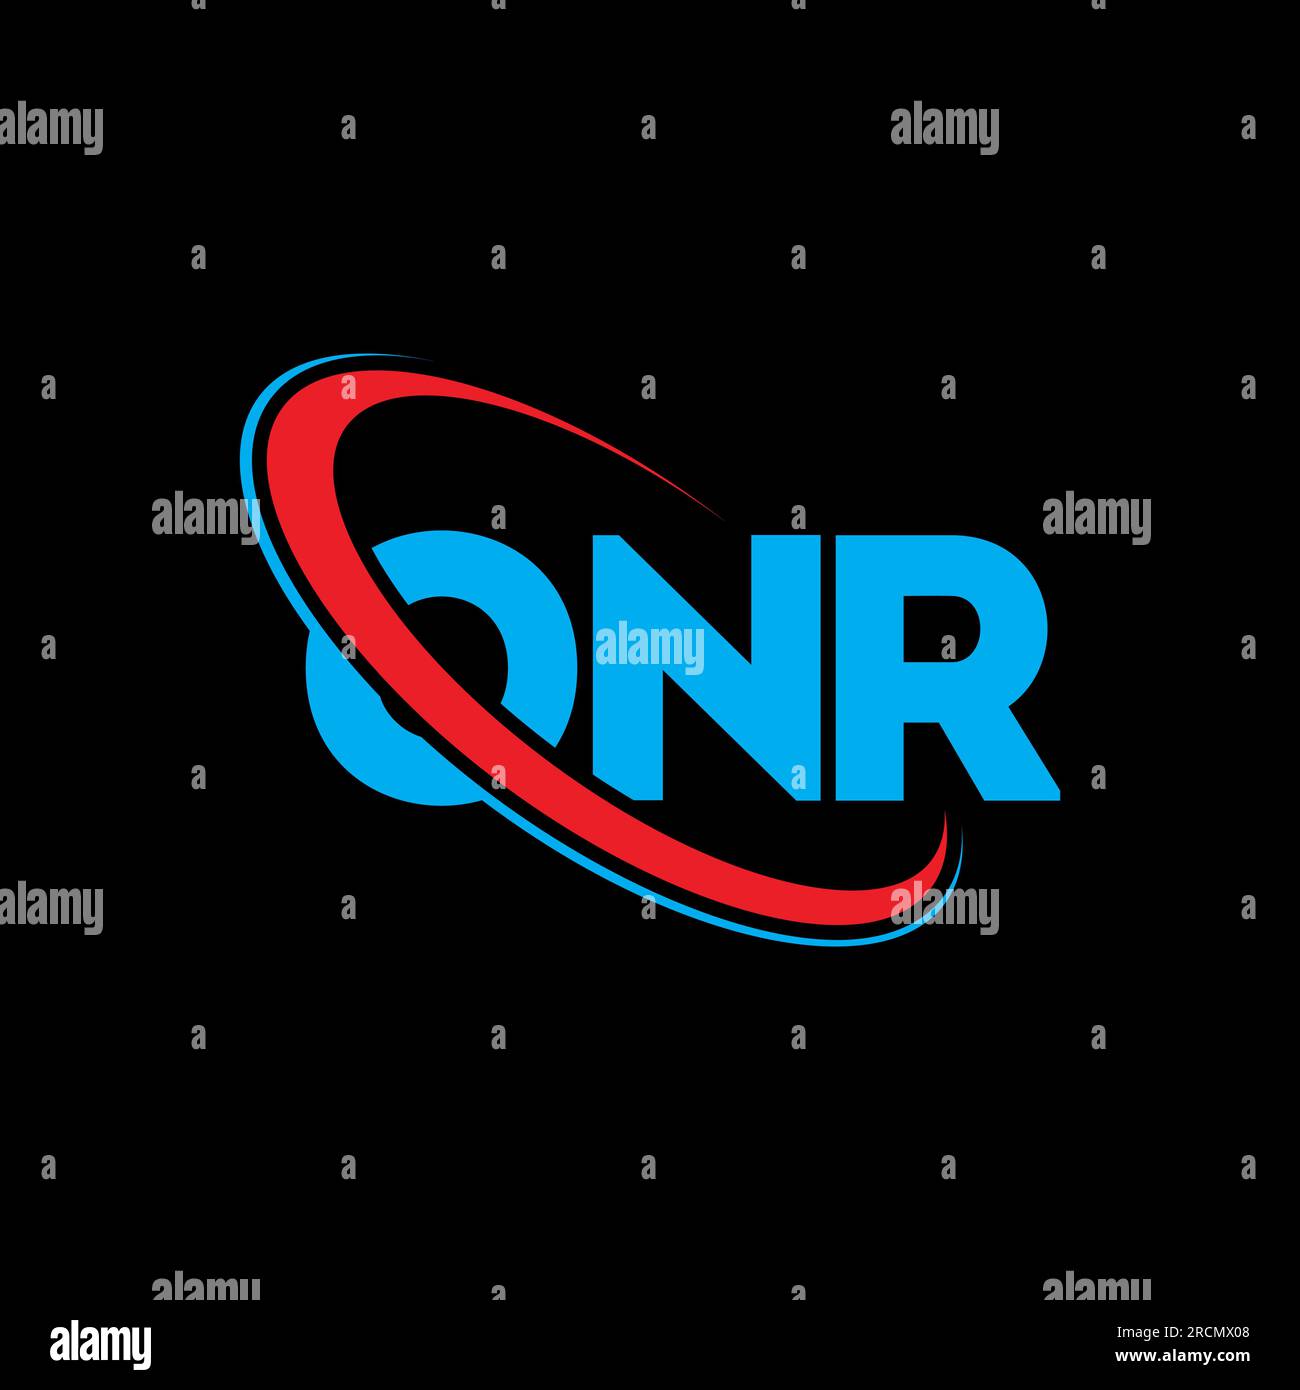 Onr symbol Stock Vector Images - Alamy